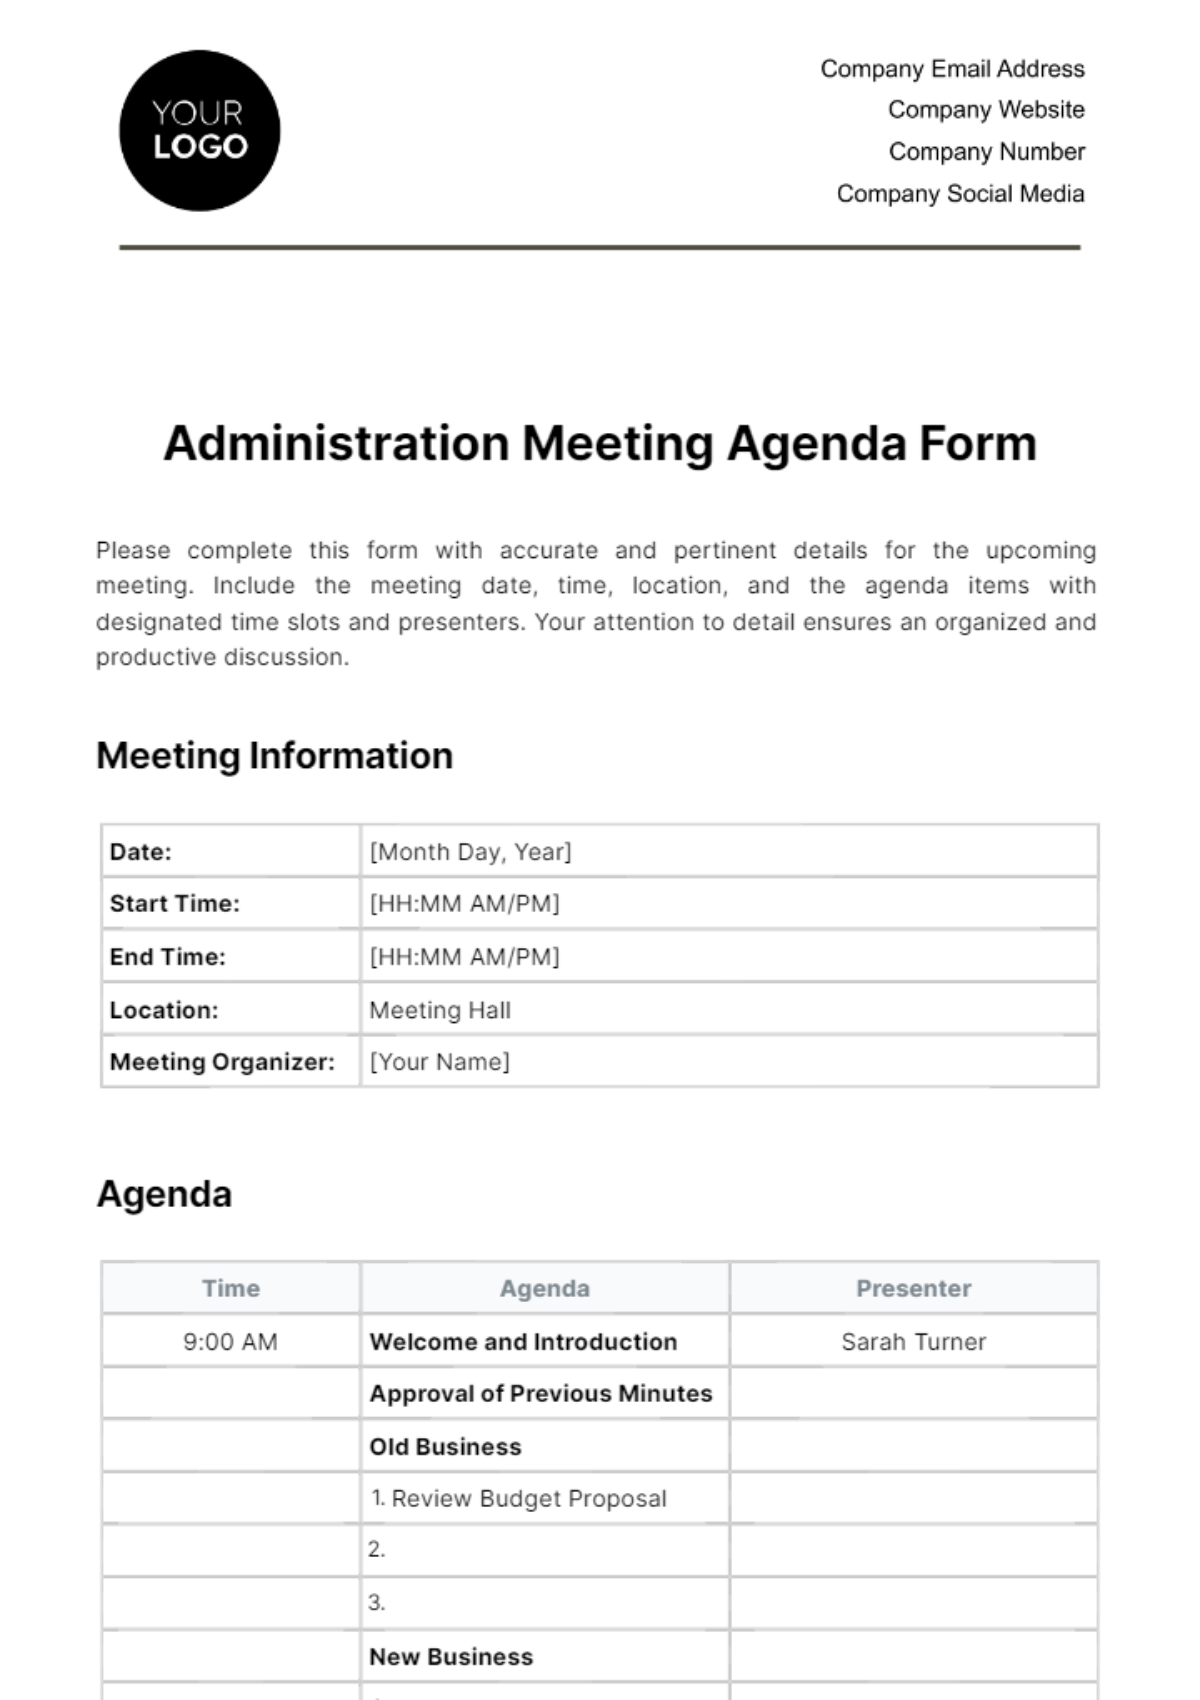 Administration Meeting Agenda Form Template